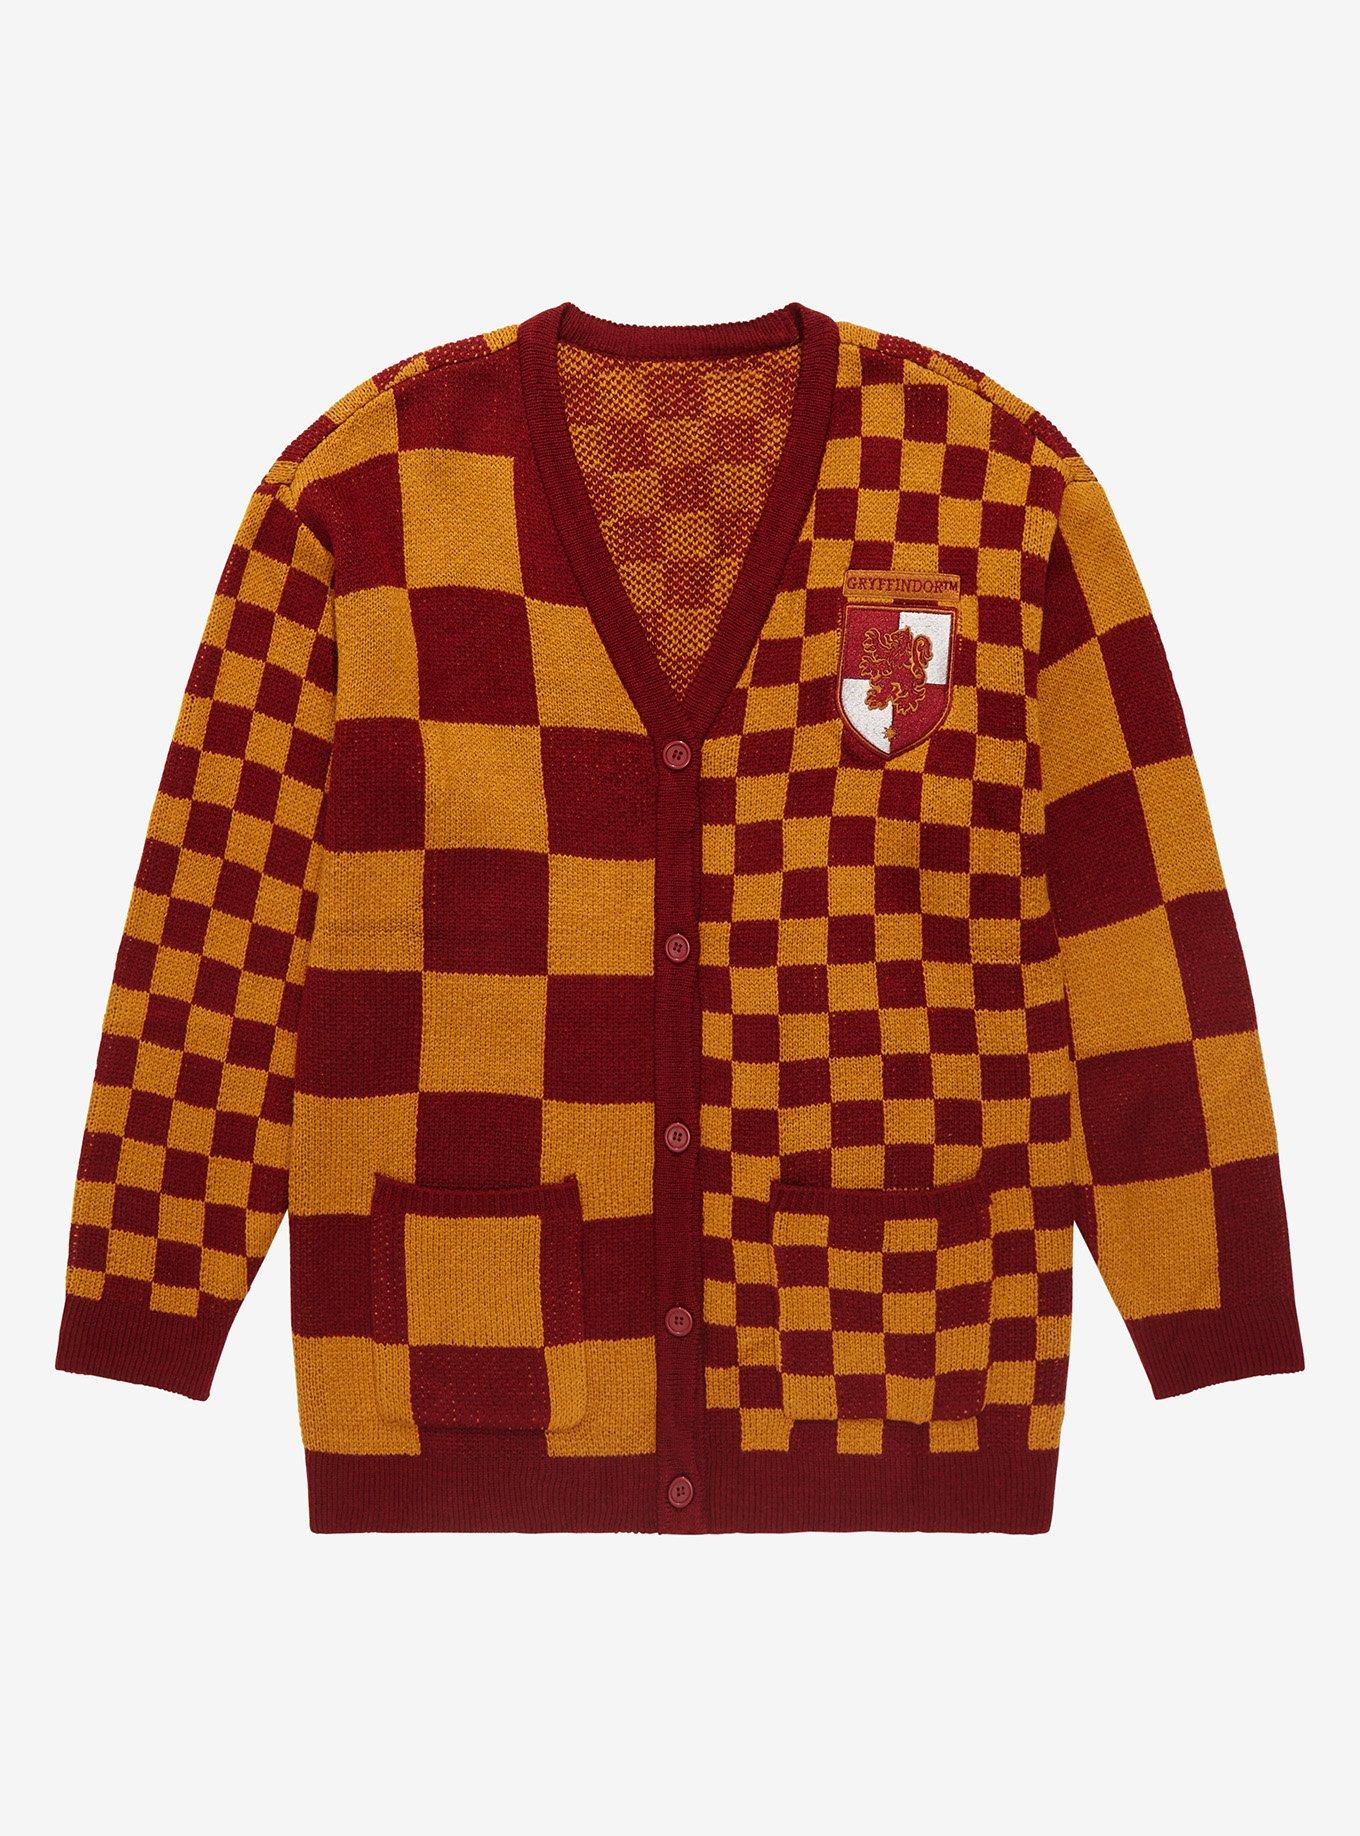 Harry Potter Gryffindor Checkered Women's Cardigan - BoxLunch Exclusive, MULTI, hi-res